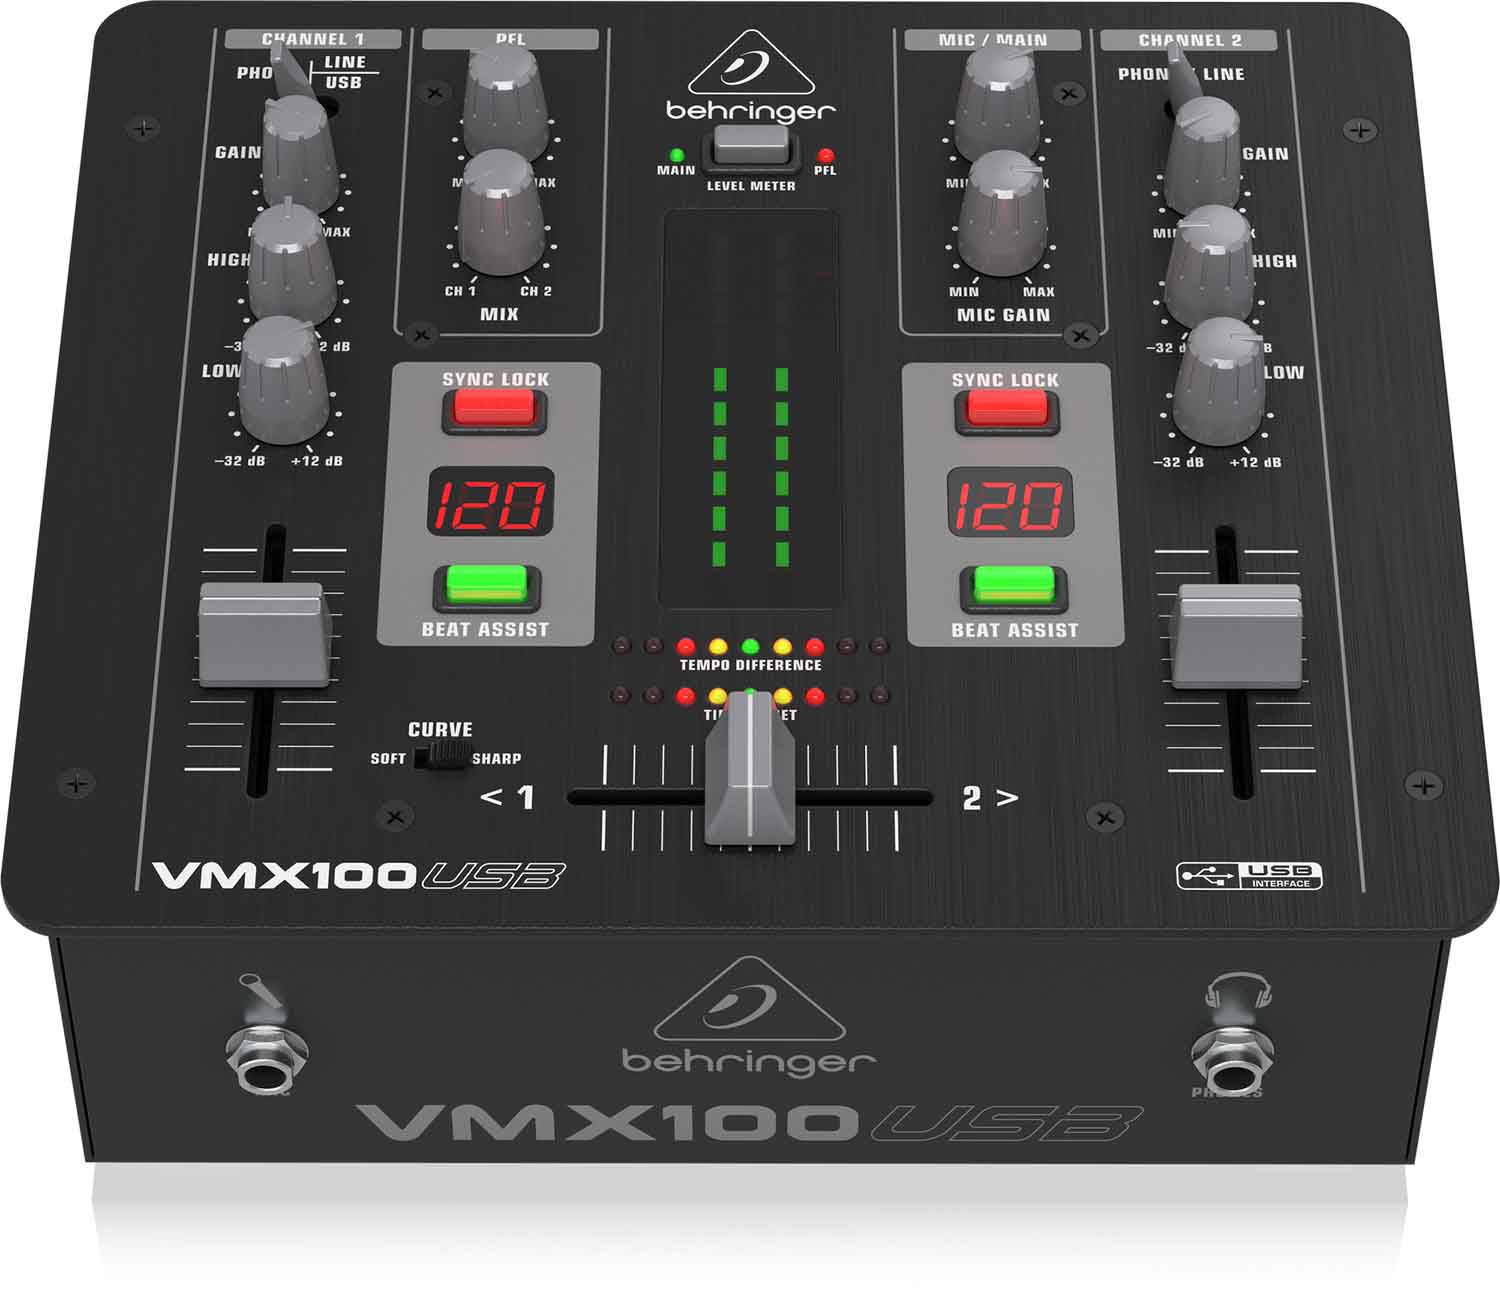 Behringer VMX100USB, 2 Channel DJ Mixer with USB/Audio Interface - Hollywood DJ